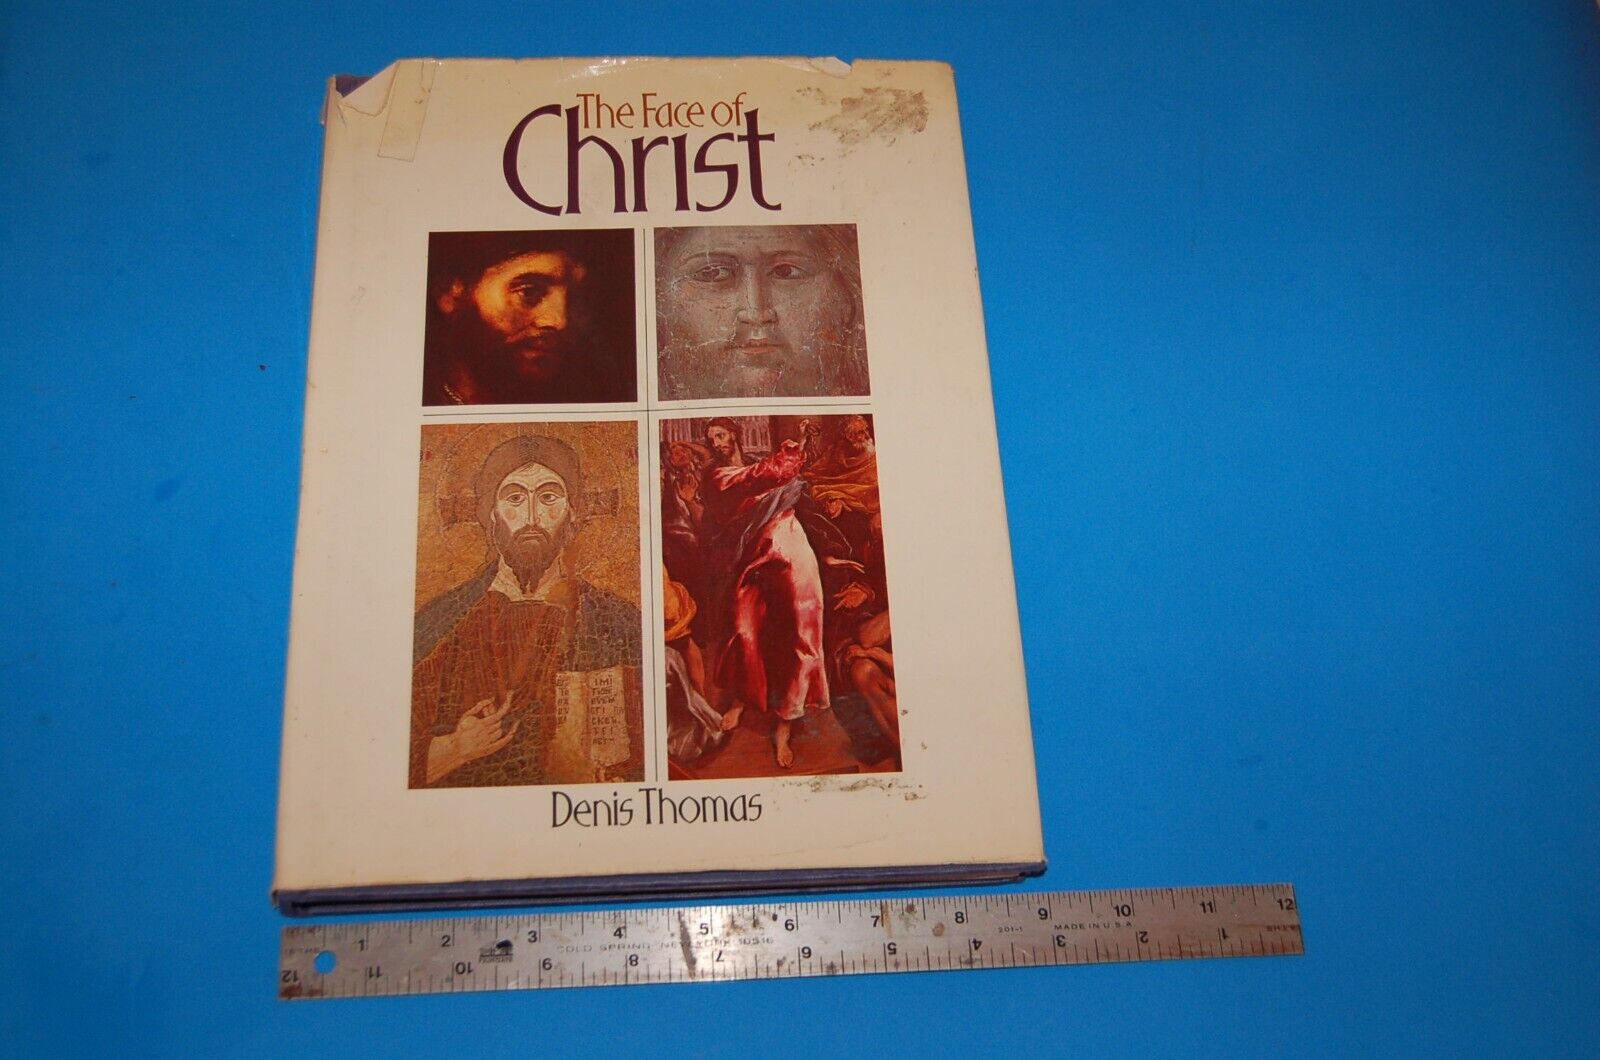 THE FACE OF CHRIST By Denis Thomas - Hardcover Book 1979 vintage